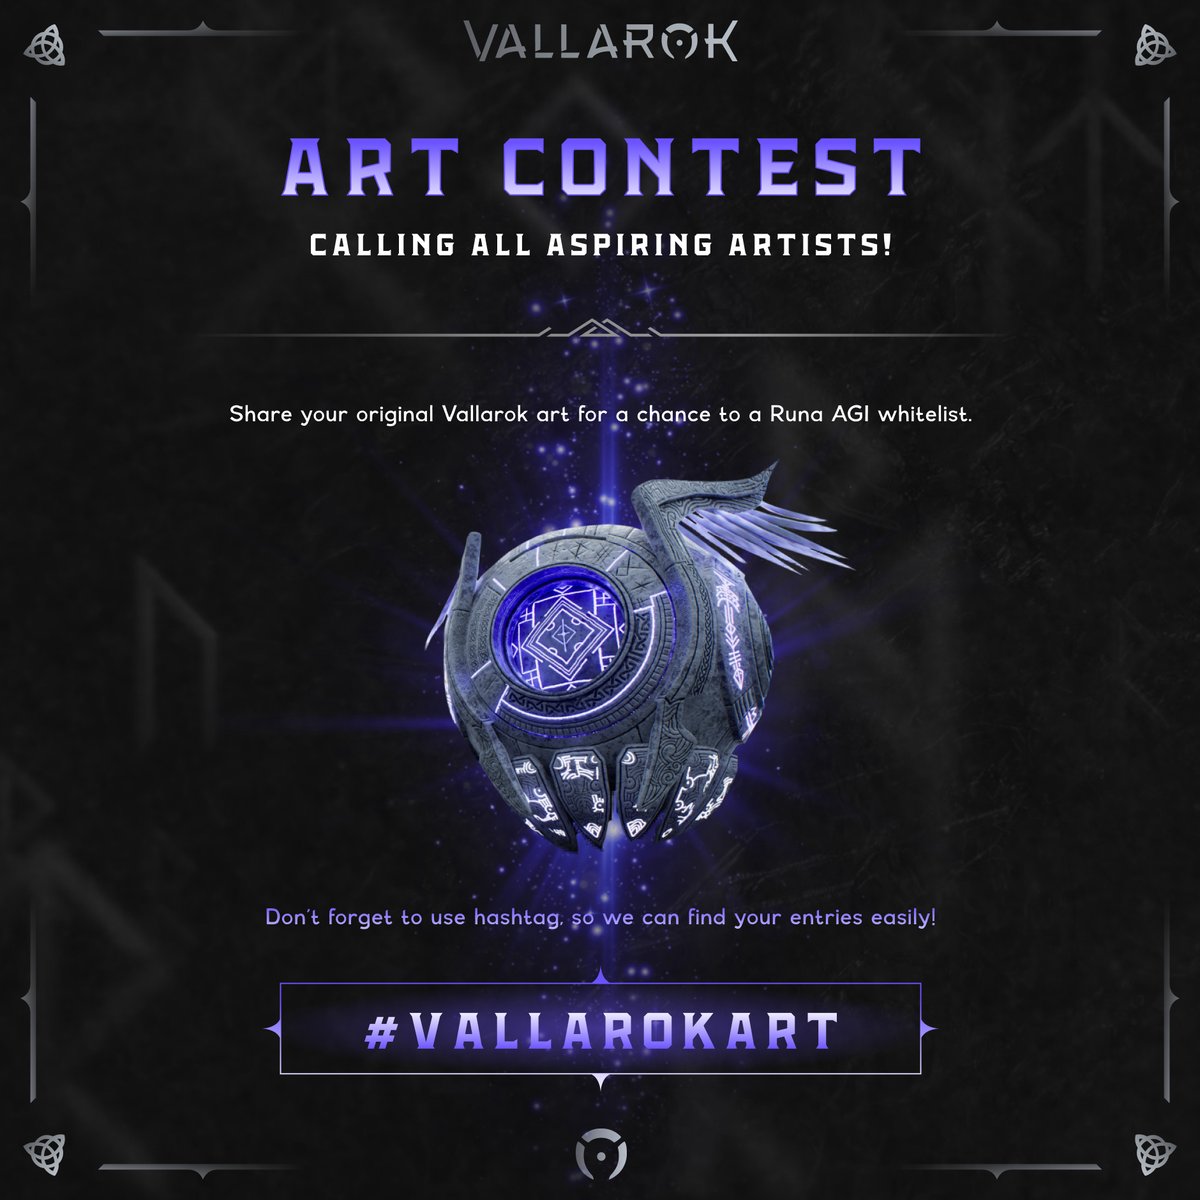 Attention aspiring artists! 

Unleash your creativity in the Vallarok Fan Art contest! 

Win a Runa AGI whitelist spot.

HOW TO SUBMIT
1️⃣ Repost this and tag your friends
2️⃣ Create a tweet and tag #VallarokArt

Deadline: 21th of April!

Let your imagination bring the Viking saga…